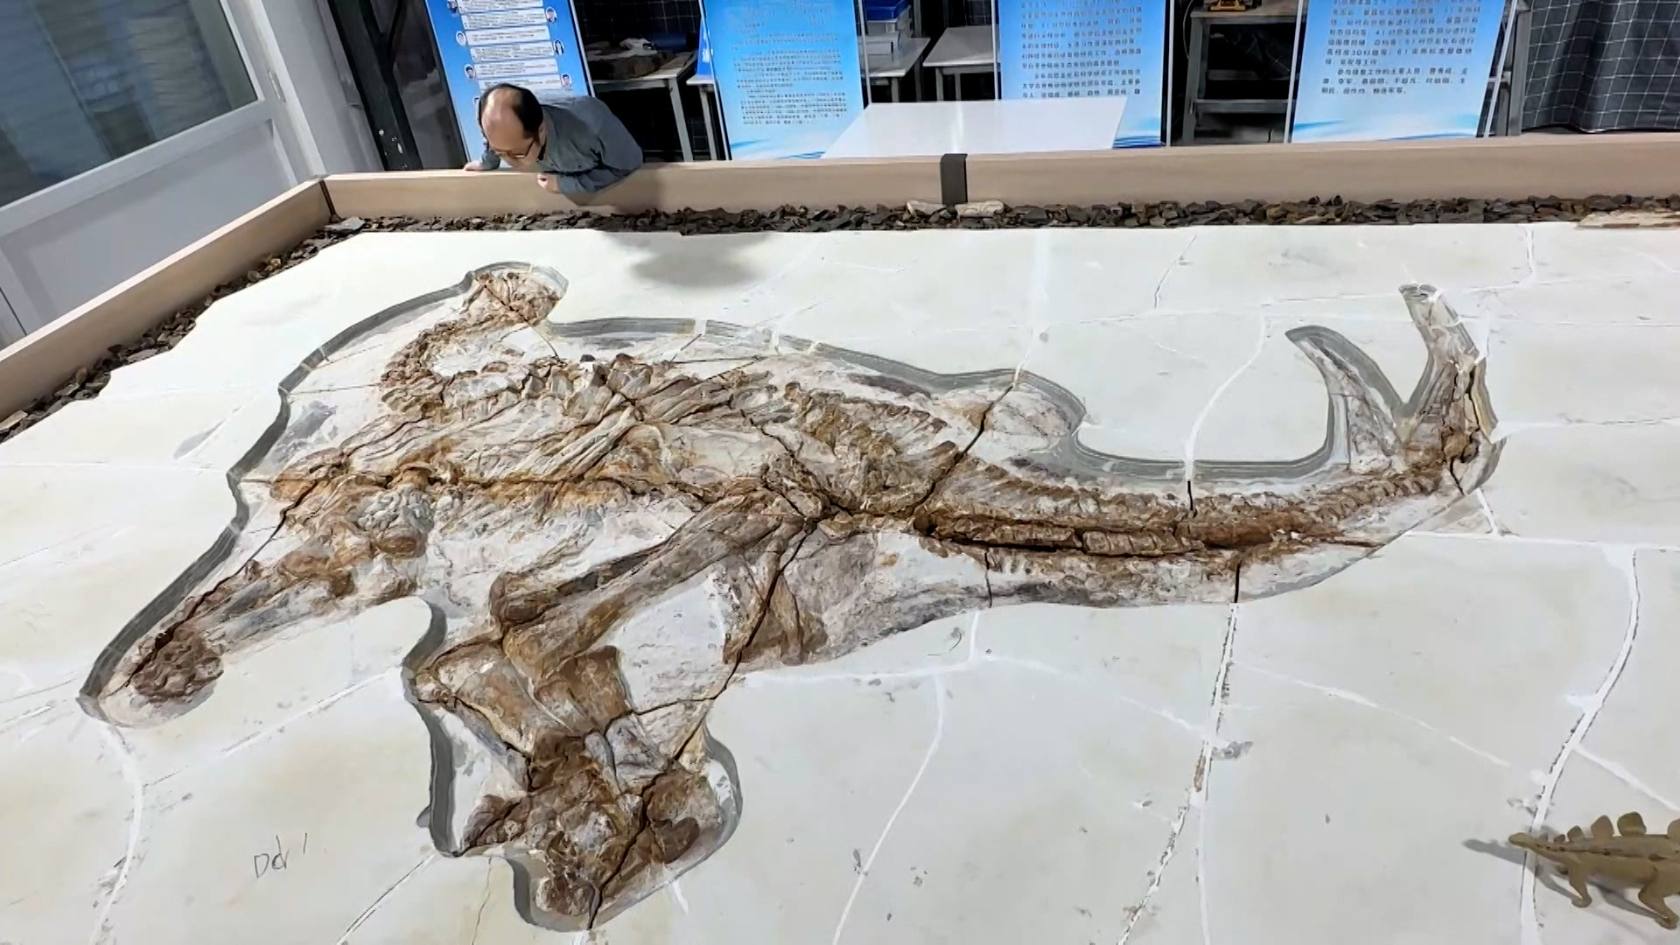 China has now become a key contributor of dinosaur fossils and knowledge. 